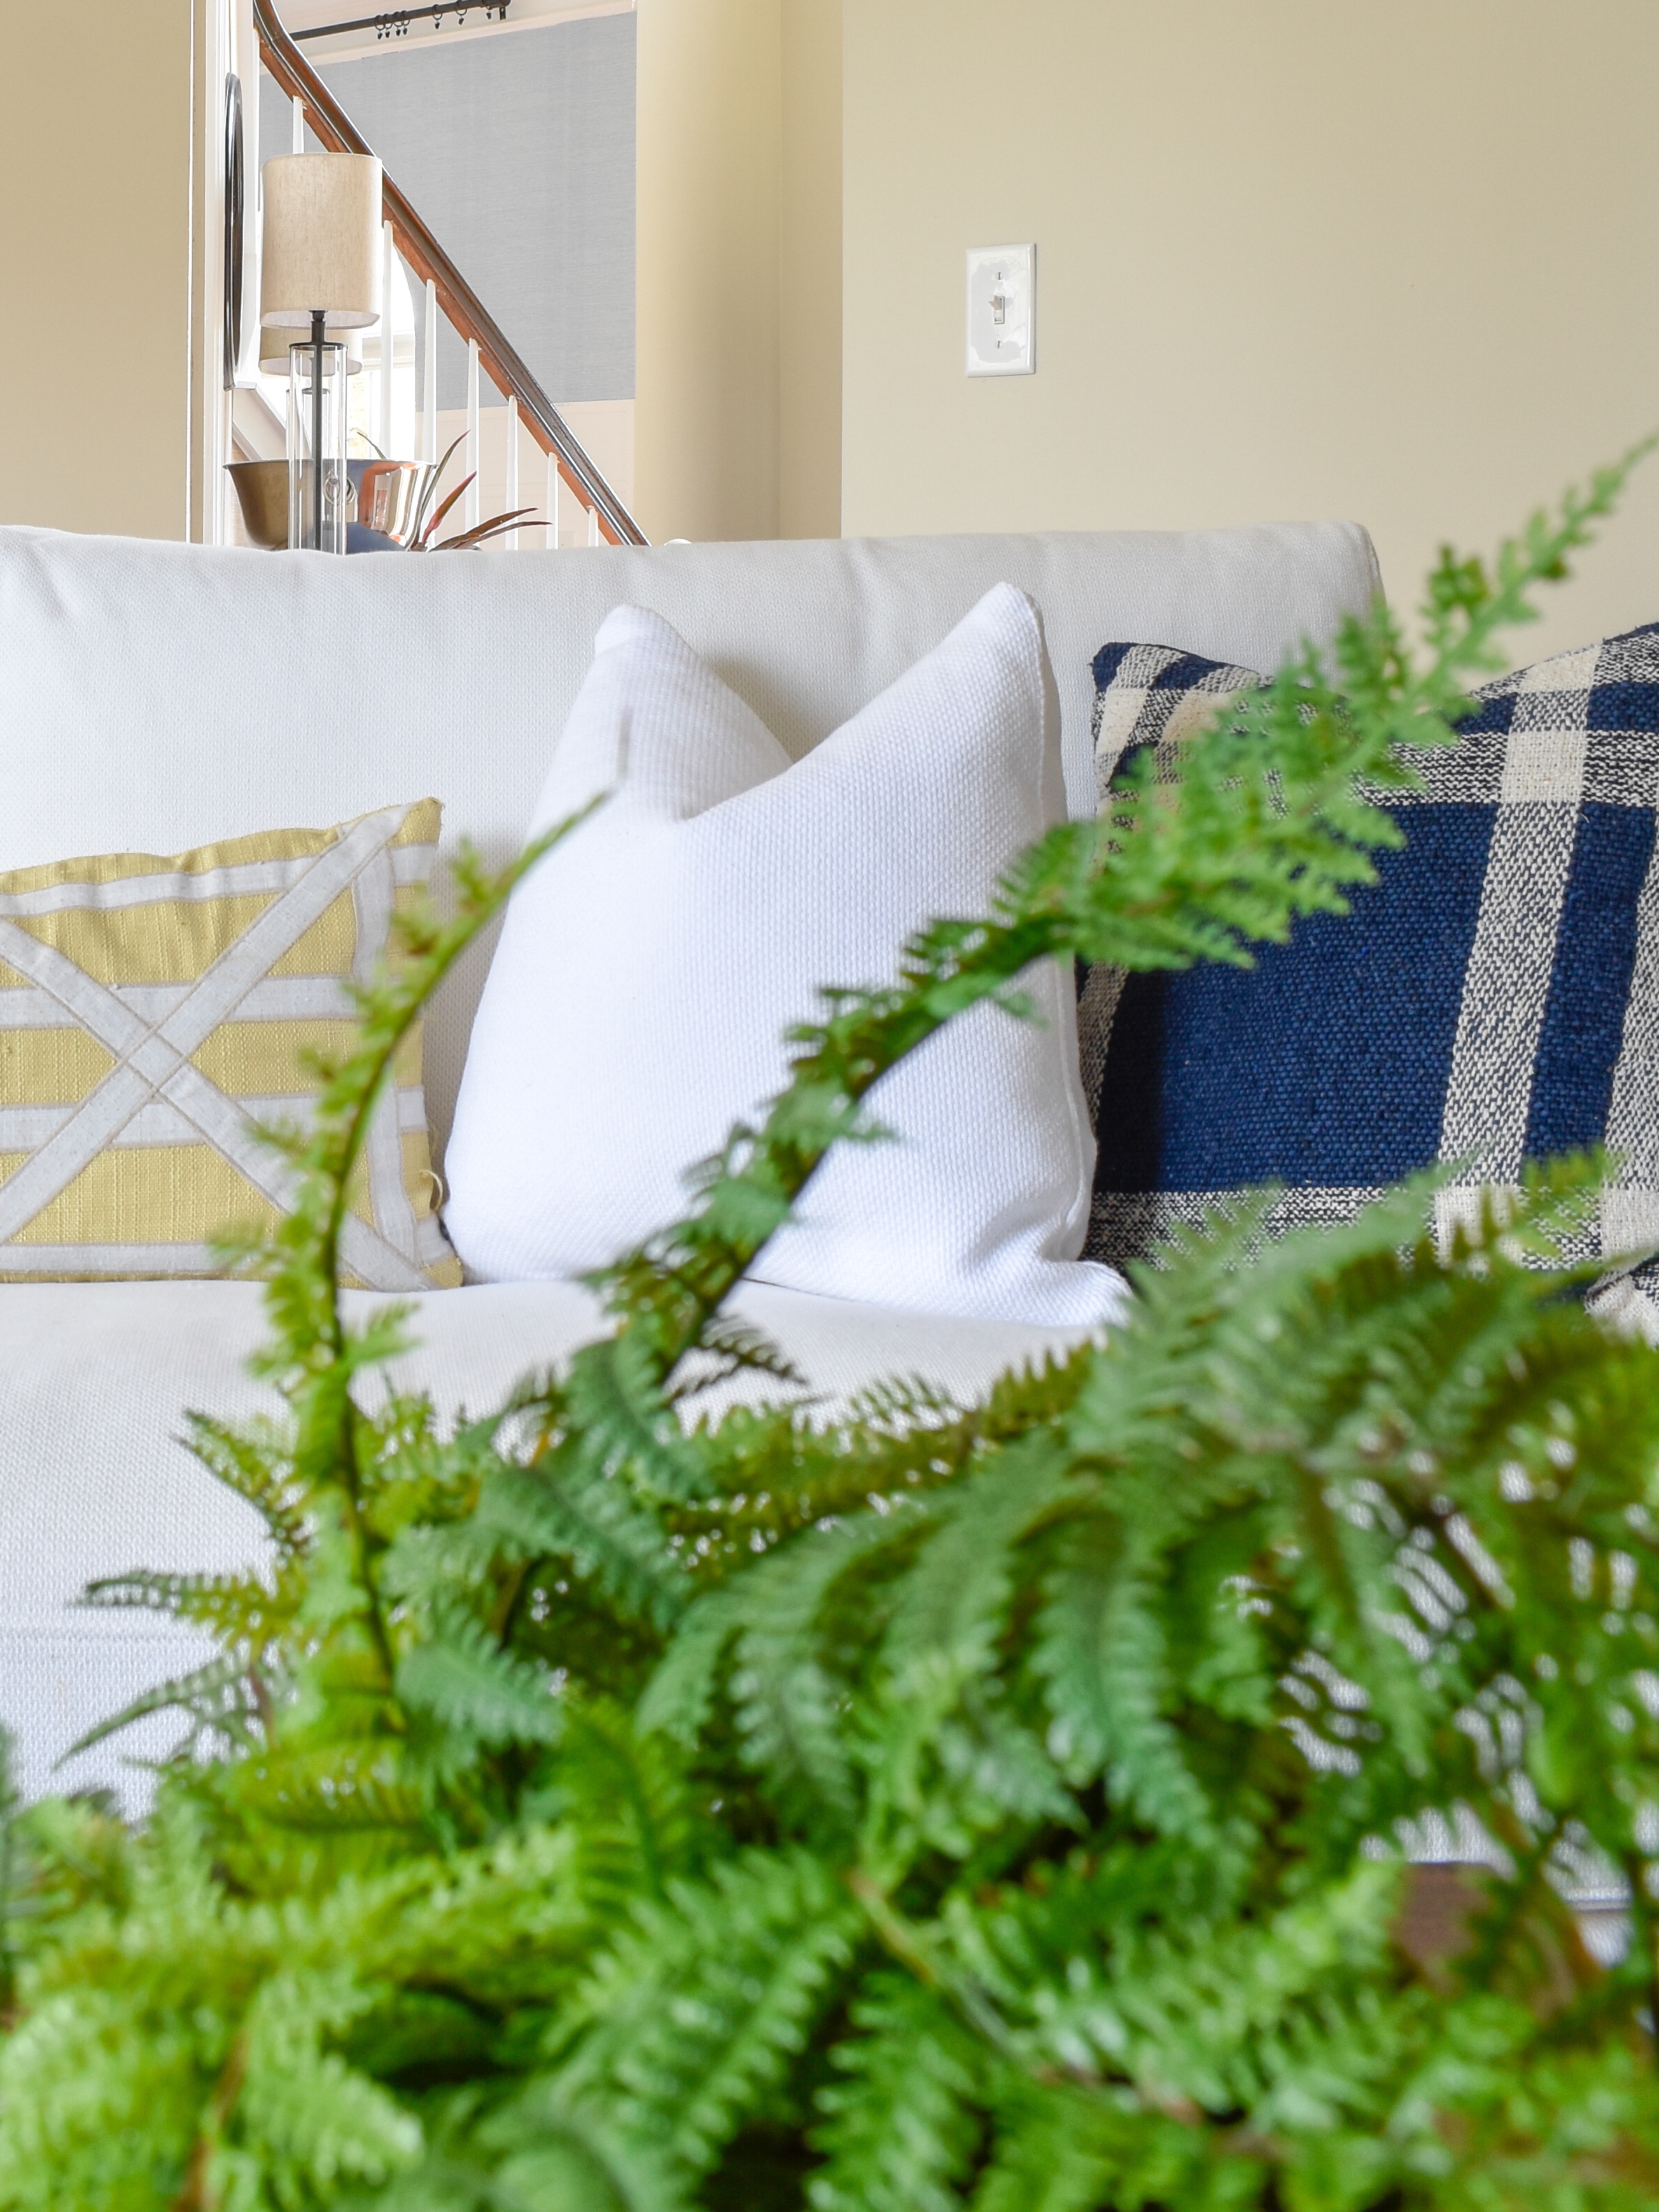 We've cleaned out the clutter and added back only one simple seasonal item that makes our home feel like Spring has sprung!  #springdecor #springlivingroom